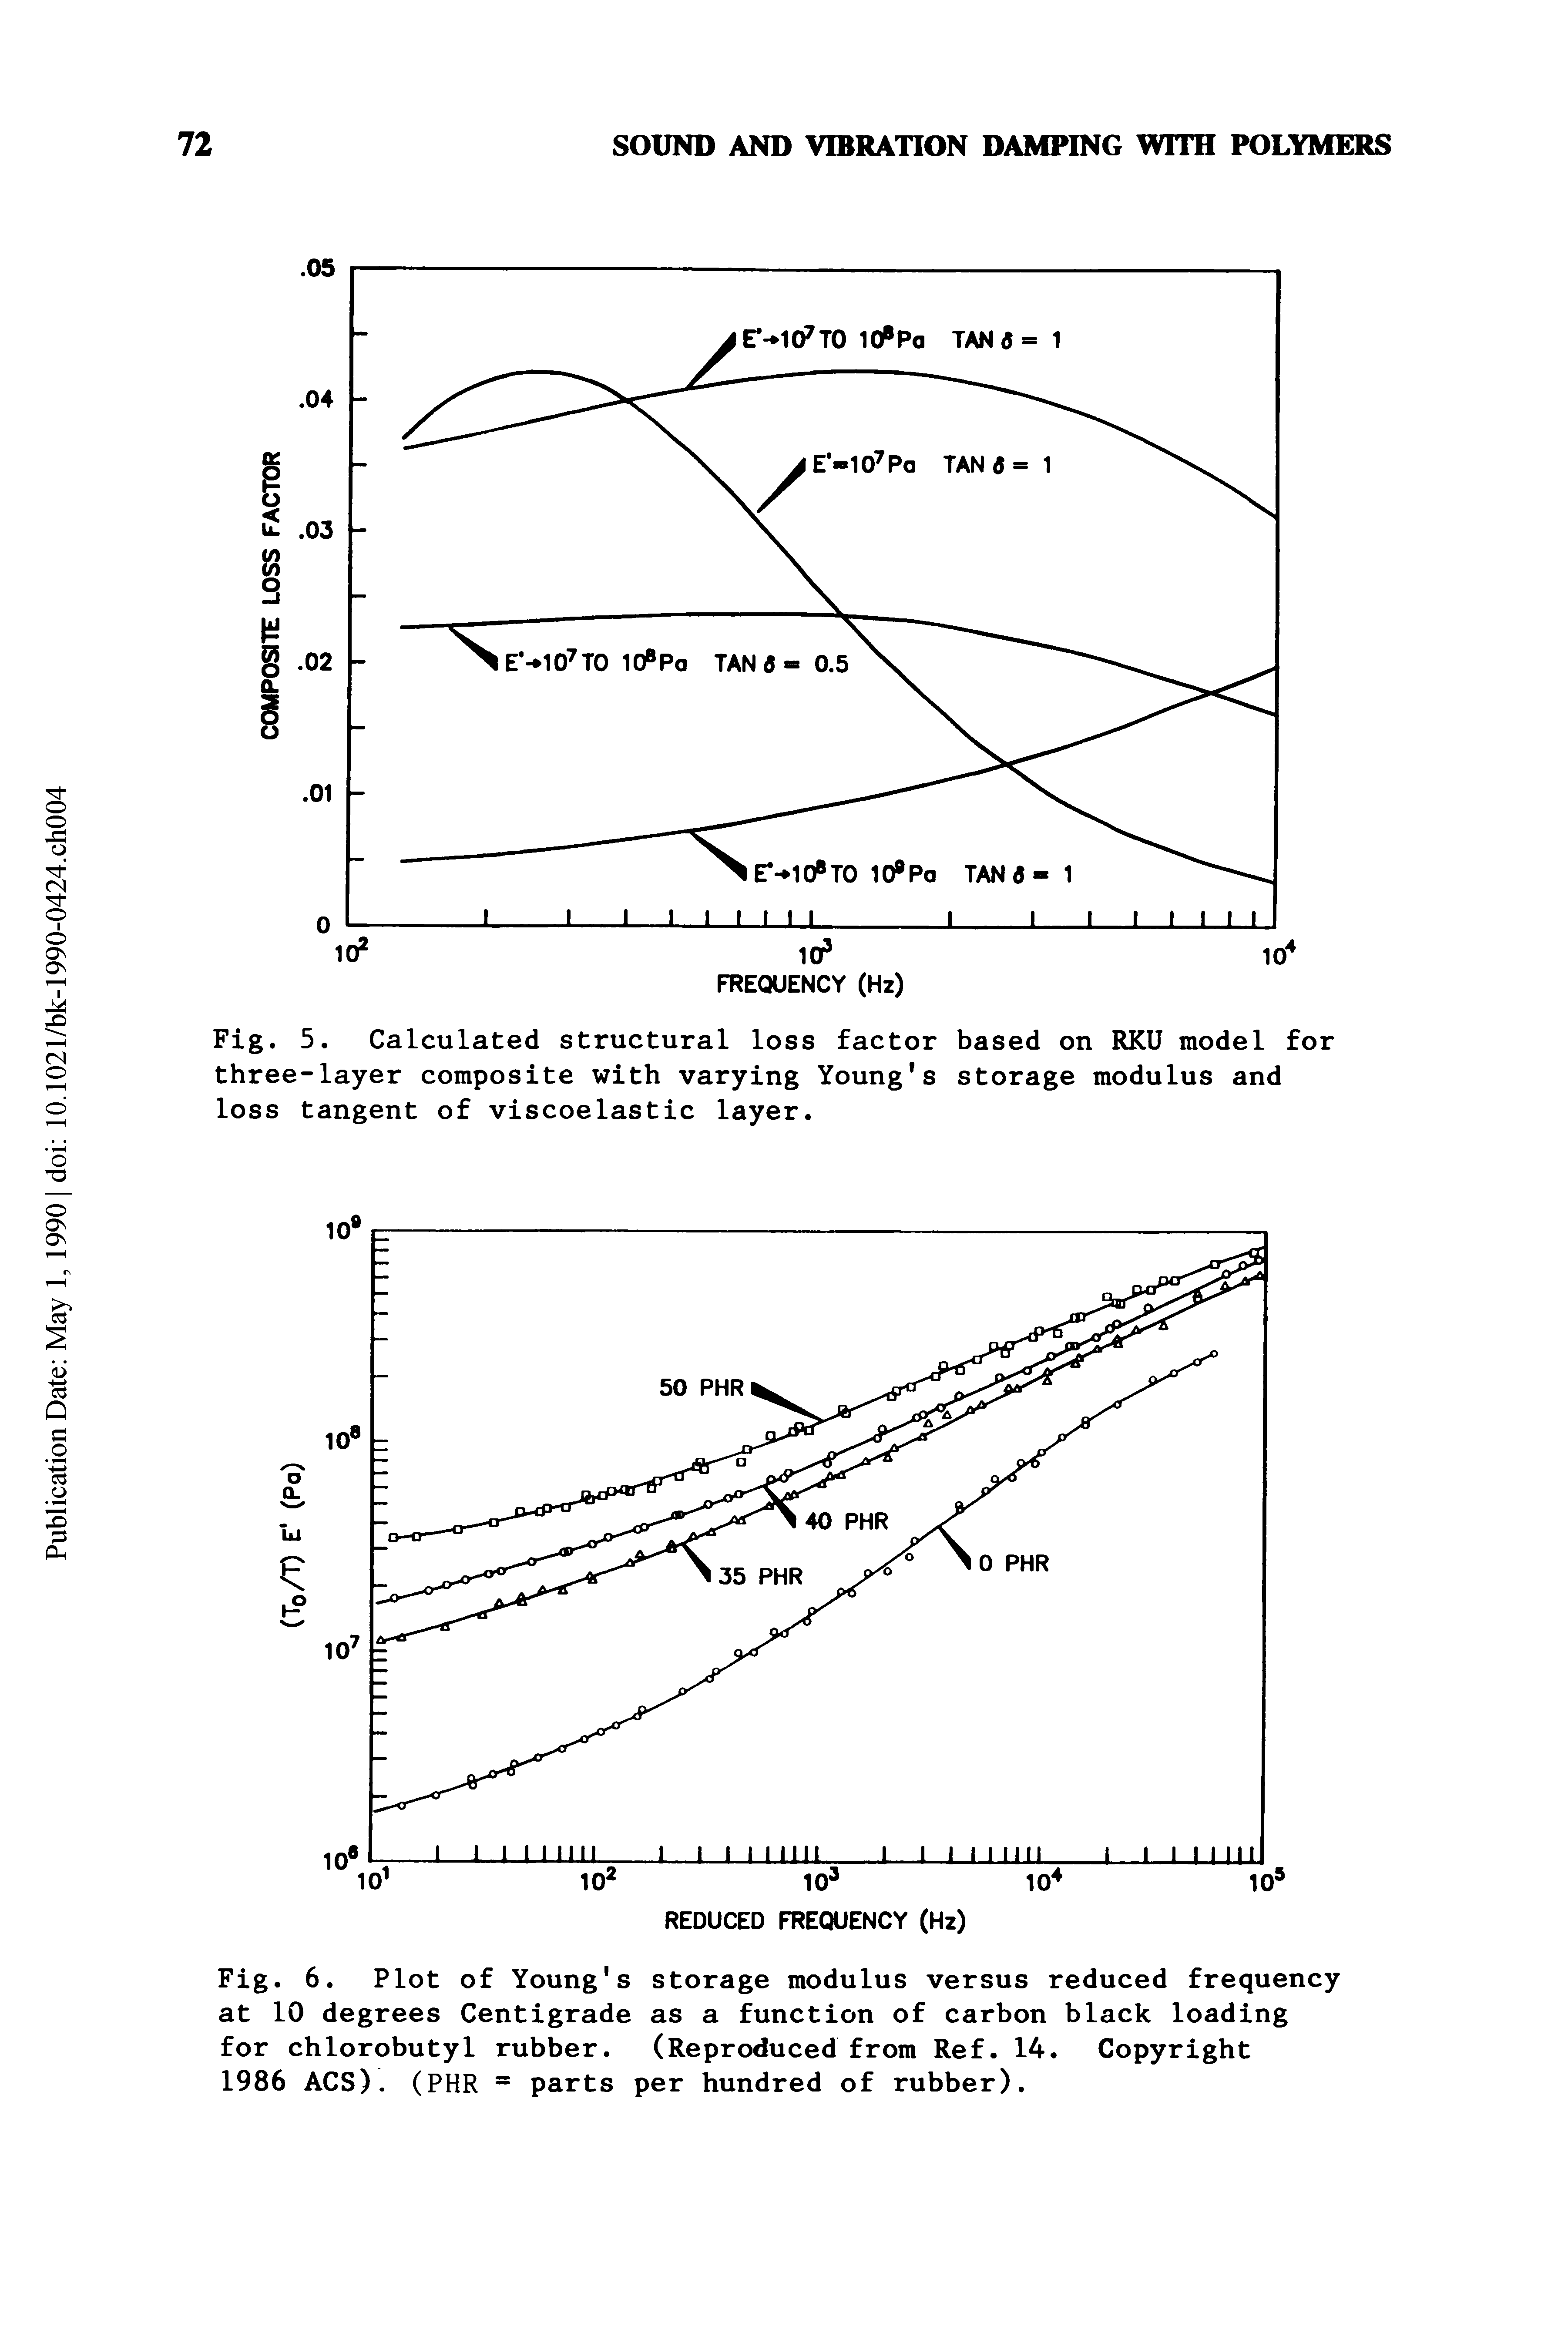 Fig. 6. Plot of Young s storage modulus versus reduced frequency at 10 degrees Centigrade as a function of carbon black loading for chlorobutyl rubber. (Reproduced from Ref. 14. Copyright 1986 ACS). (PHR = parts per hundred of rubber).